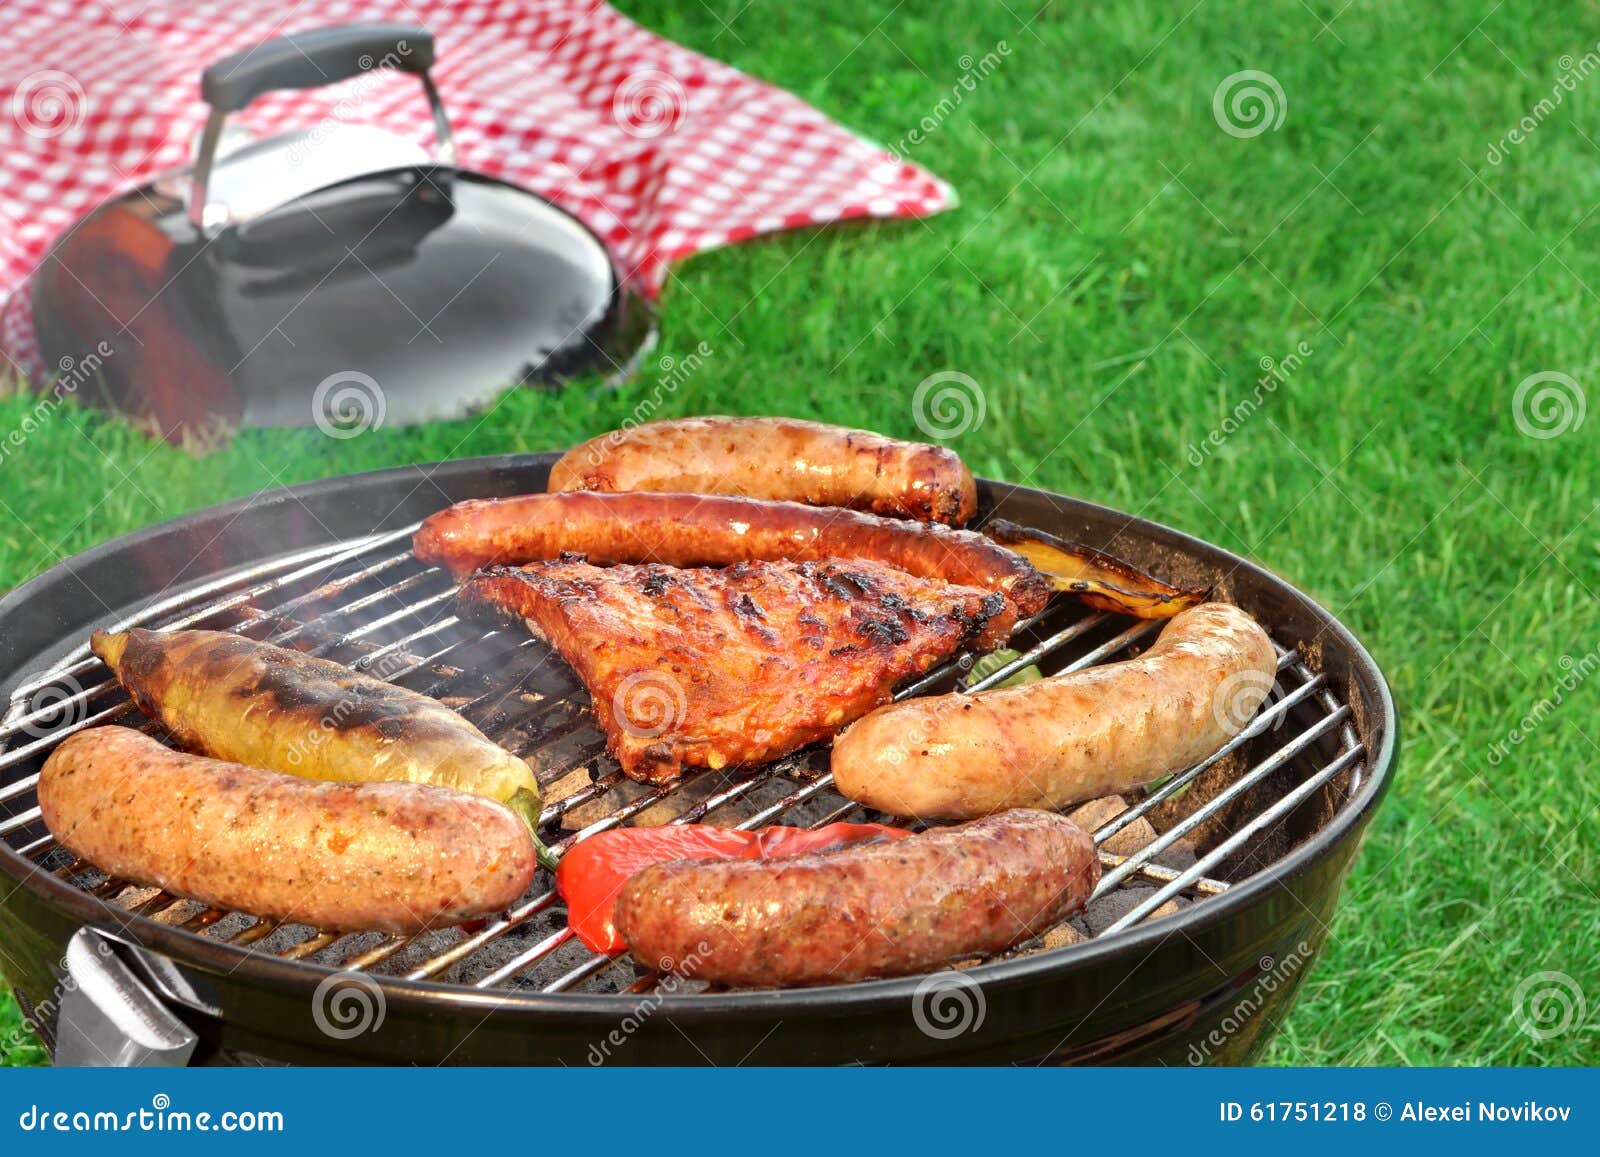 close-up of bbq grill and picnic blanket in the background